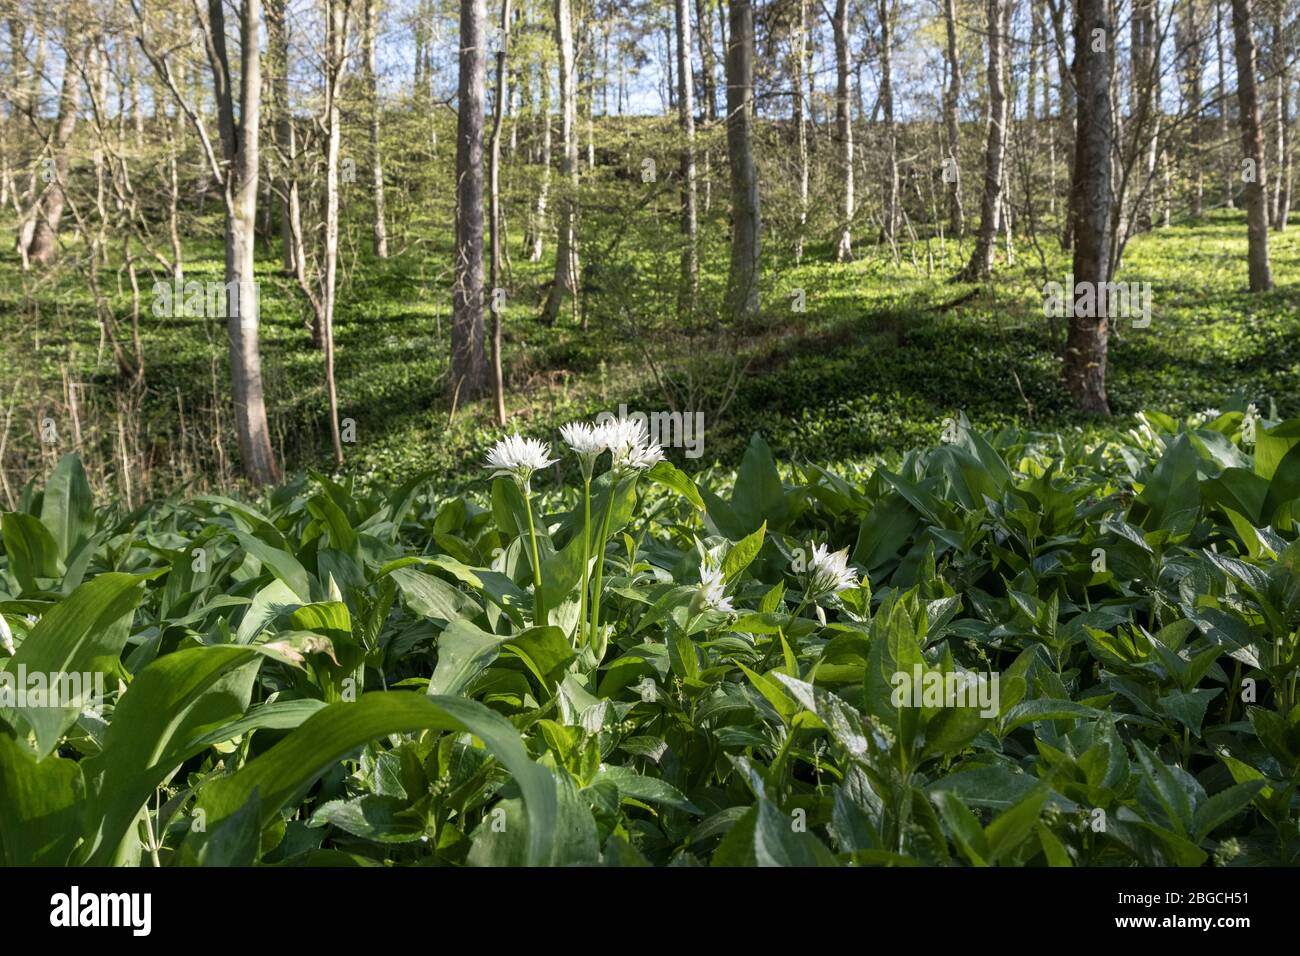 Ramsons (Allium ursinum) Flowers in a Woodland Environment UK. These edible plants are also known by common names such as Wild Garlic, Wood Garlic and Stock Photo